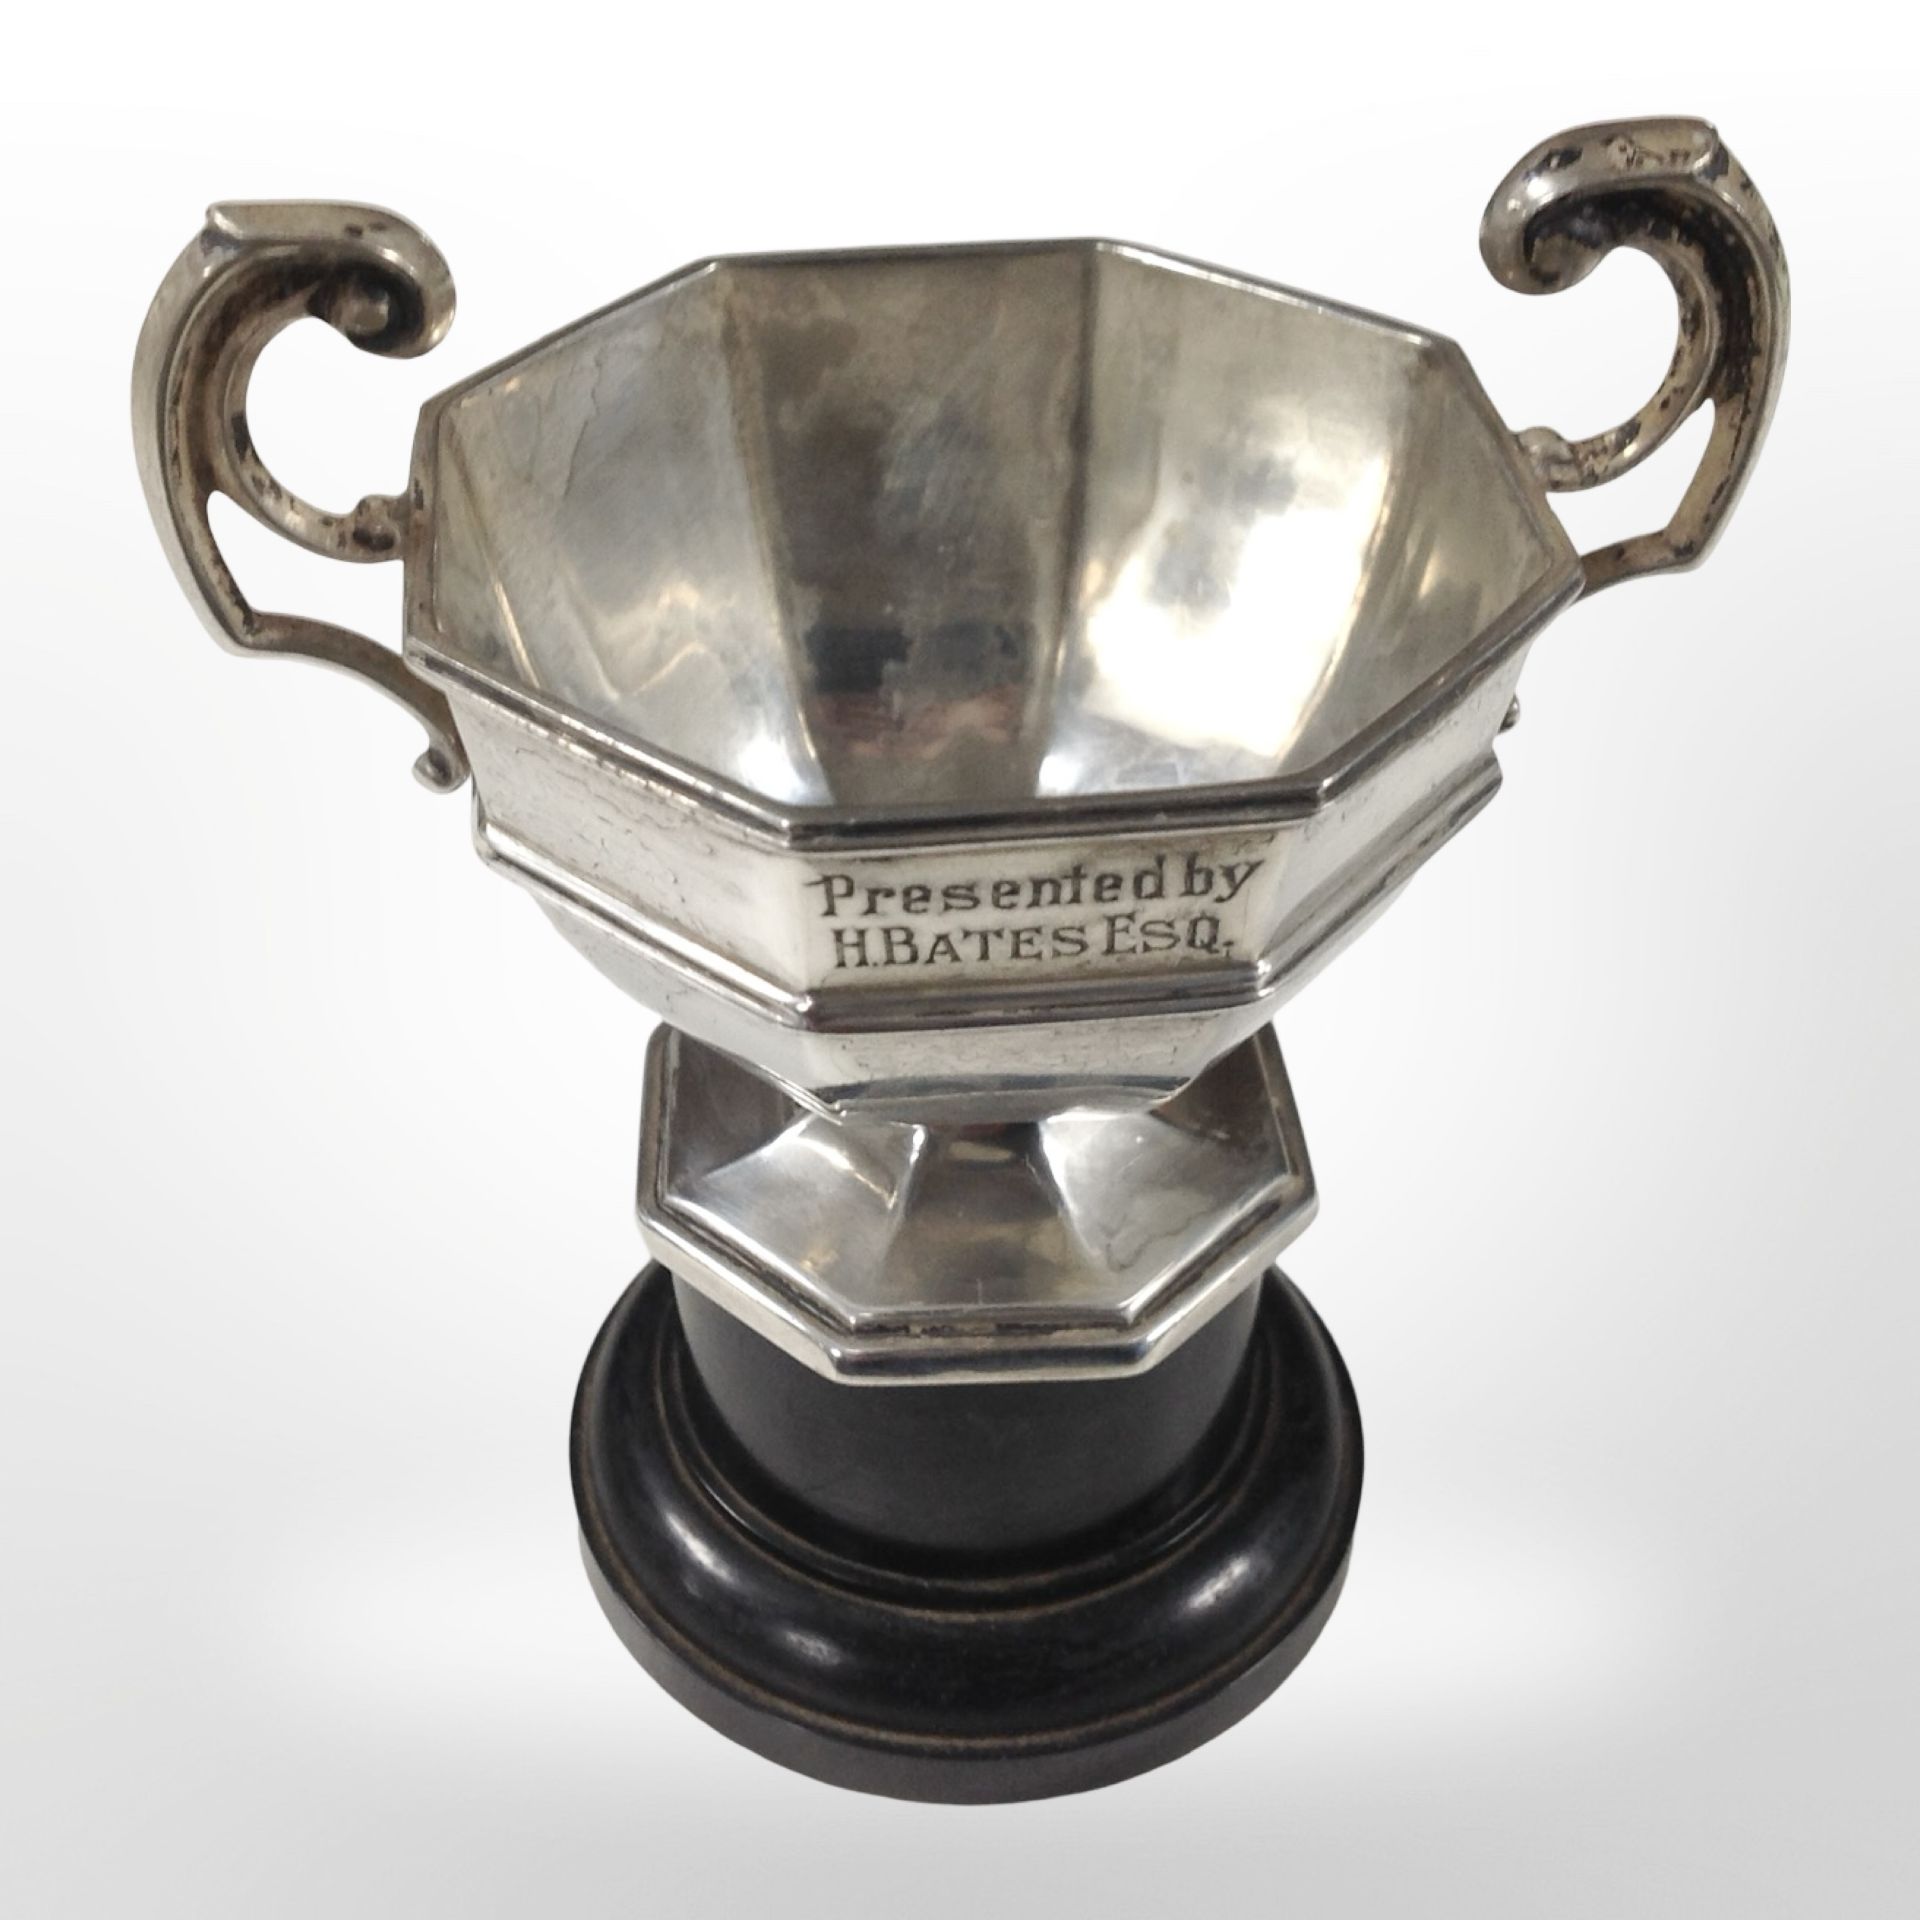 A small silver trophy cup by Walker and Hall, Sheffield marks, on pedestal, height 10cm.